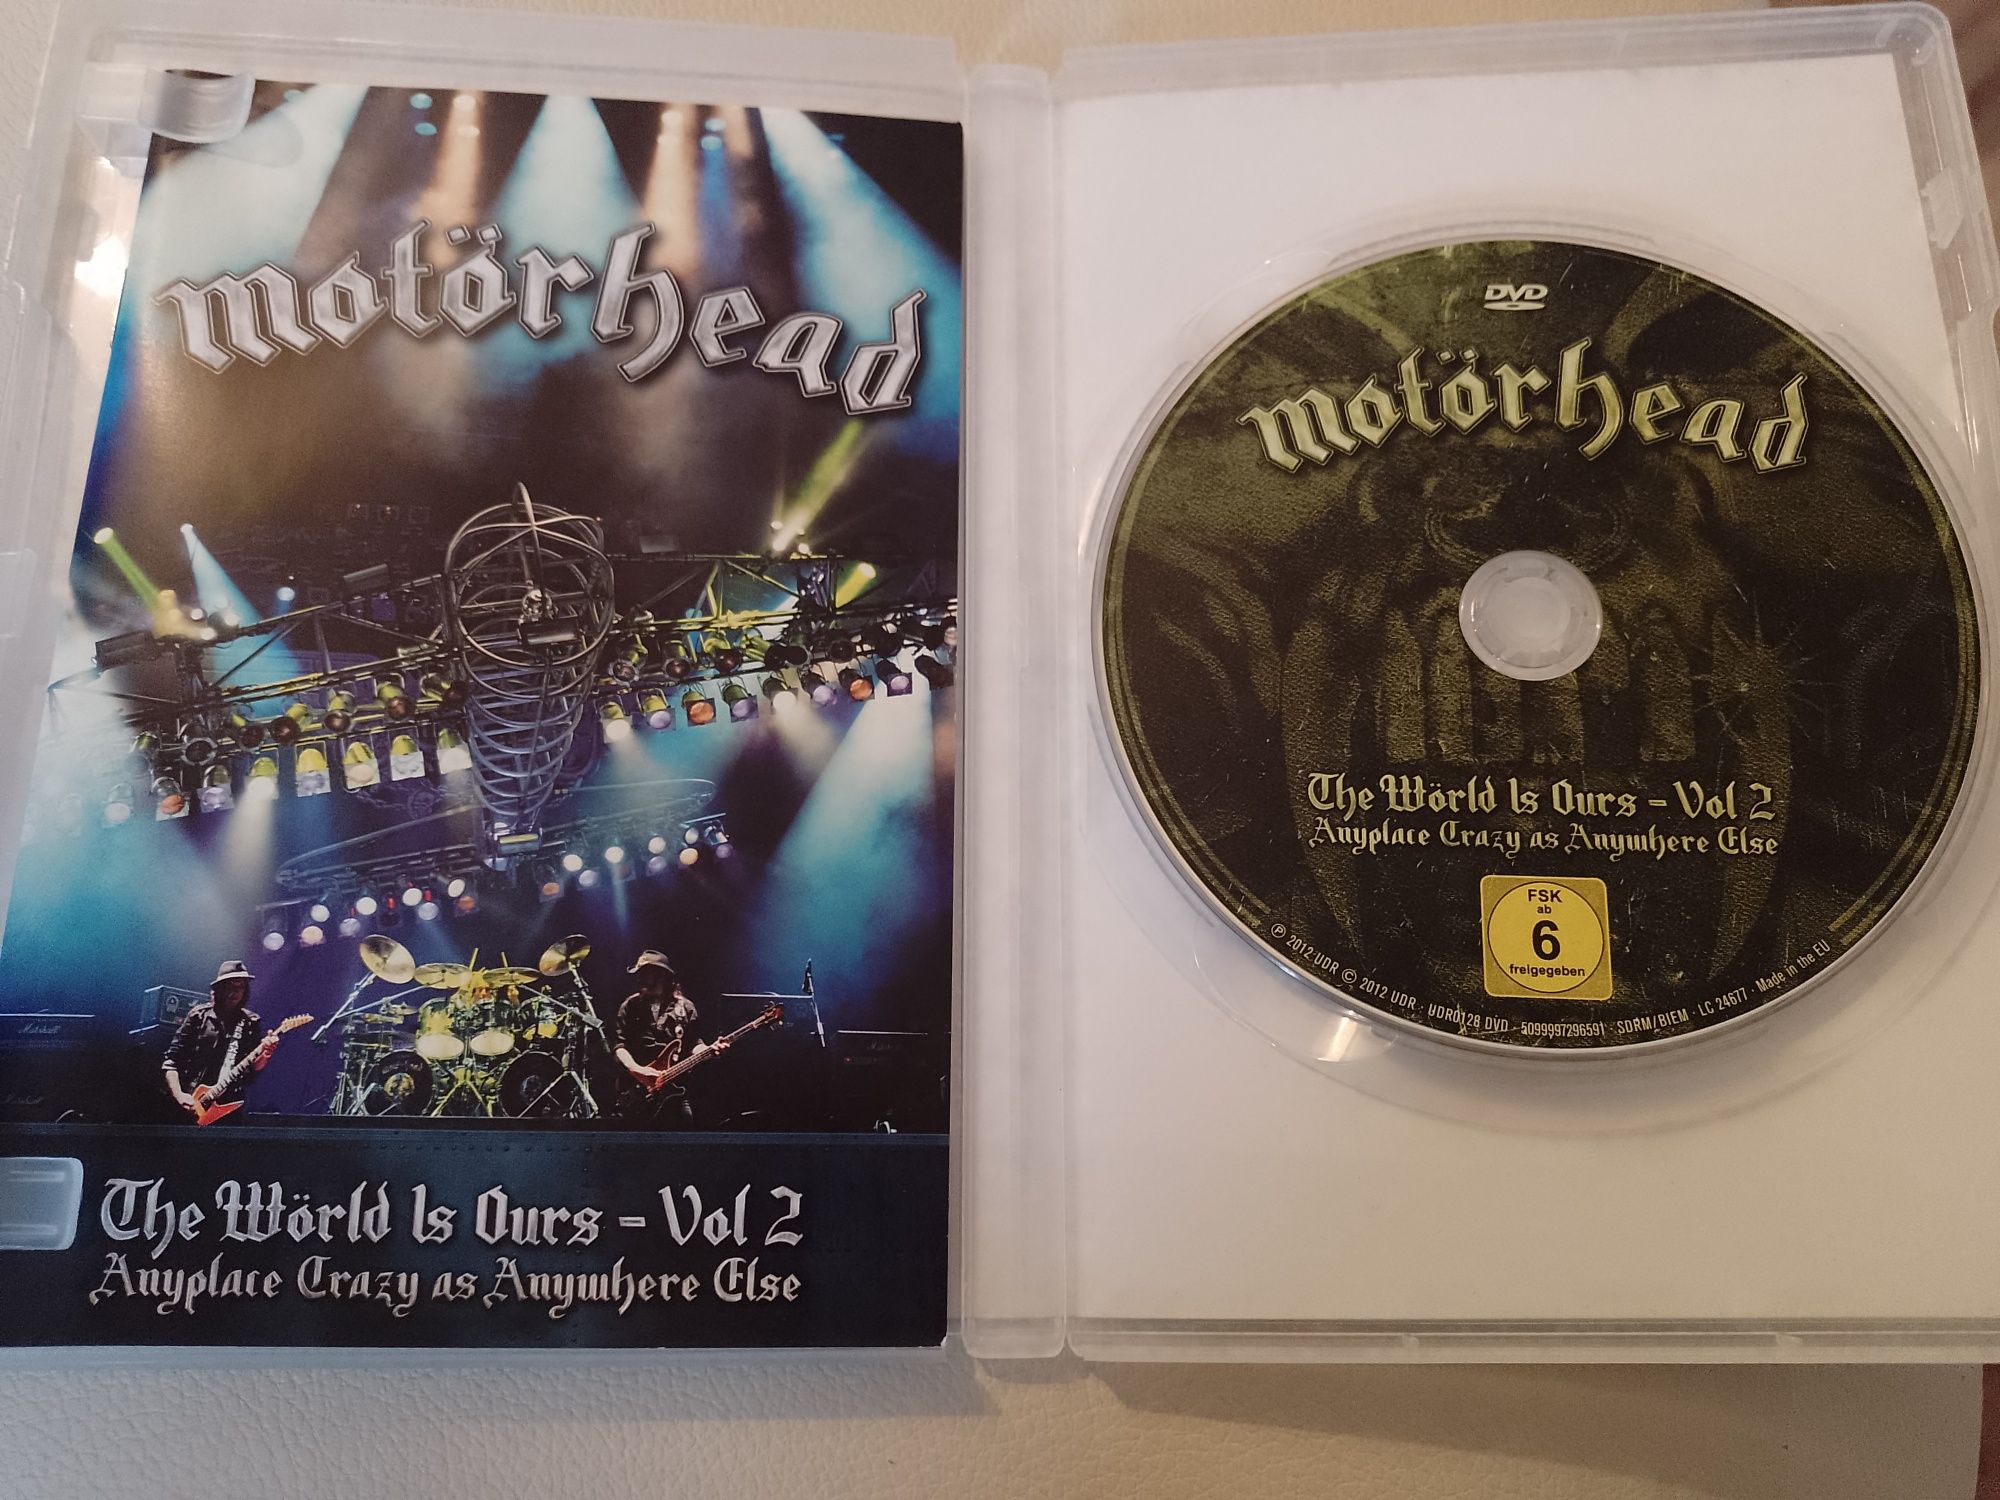 Motorhead The World Is Ours vol 2 dvd